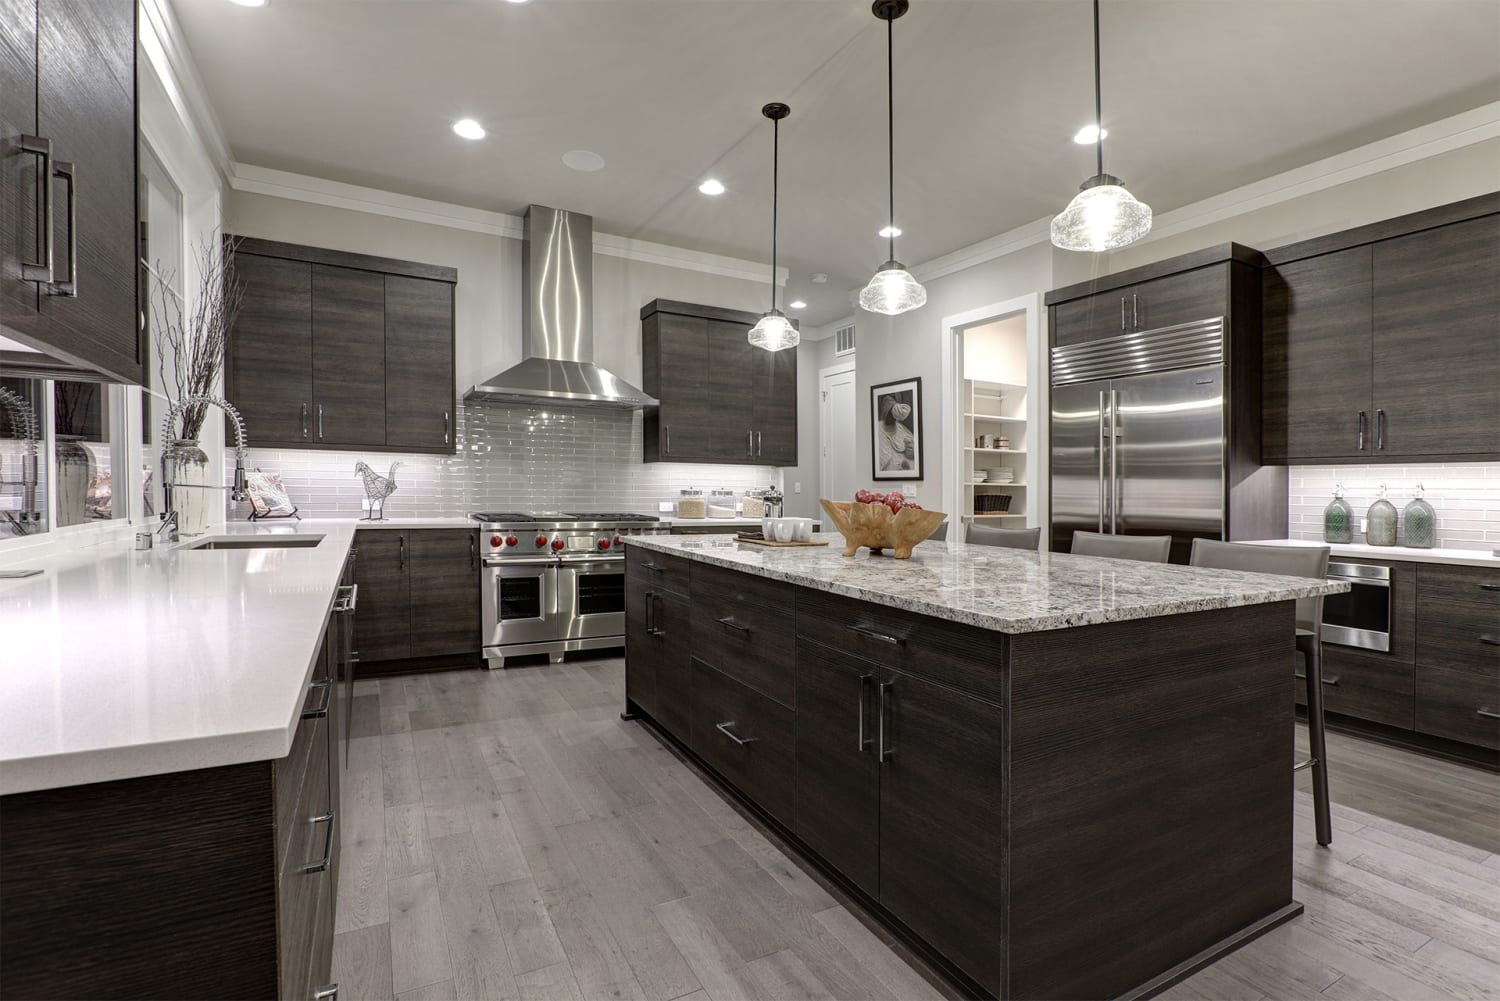 Orange County Discount Home Remodeling Materials Store